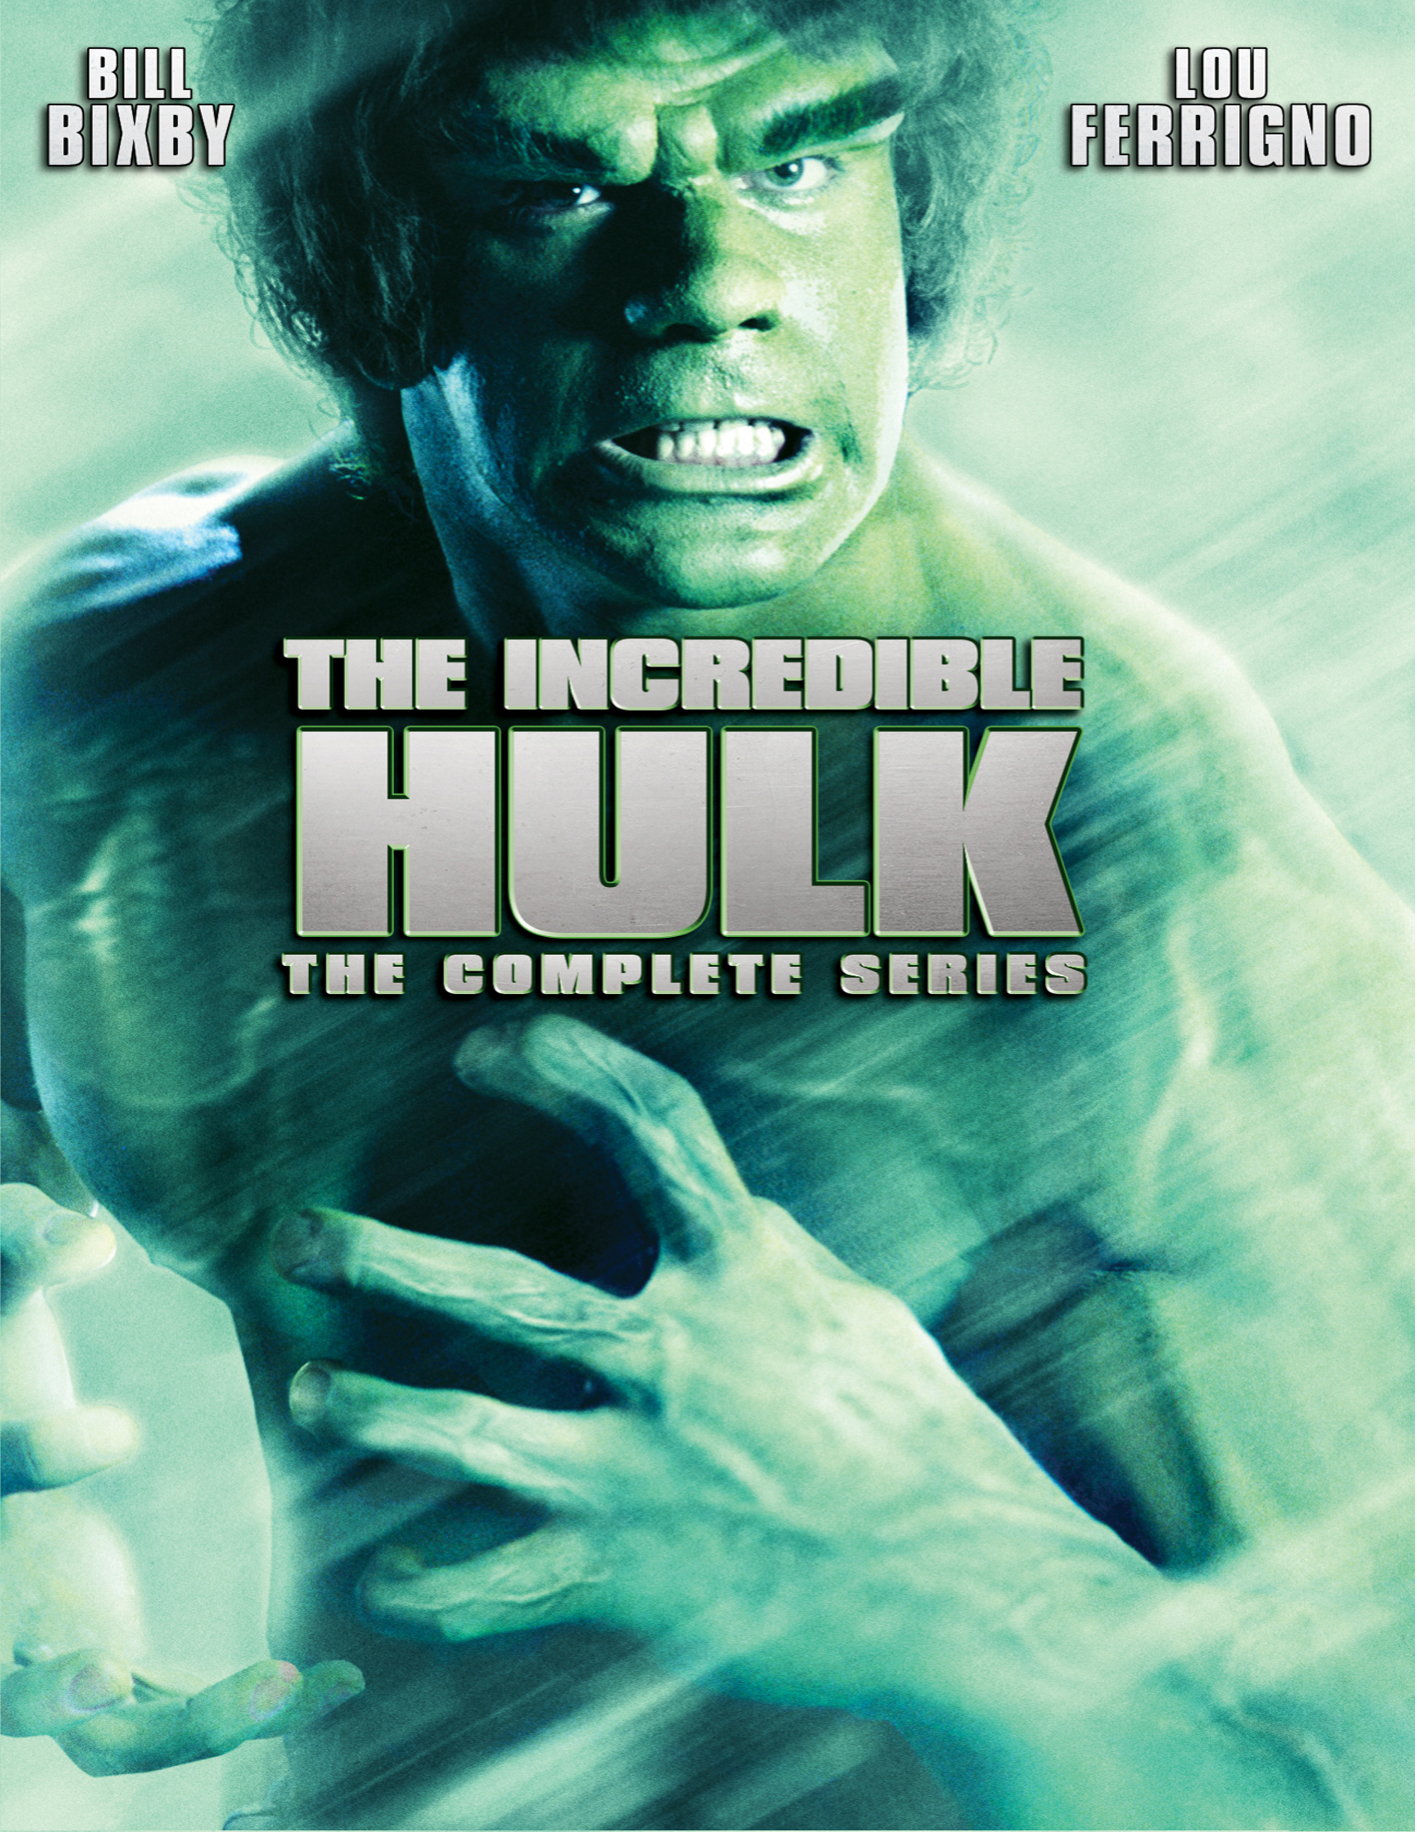 The Incredible Hulk: The Complete Series (DVD New Box Art) - DVD [ 1966 ]  - Children Movies On DVD - Movies On GRUV